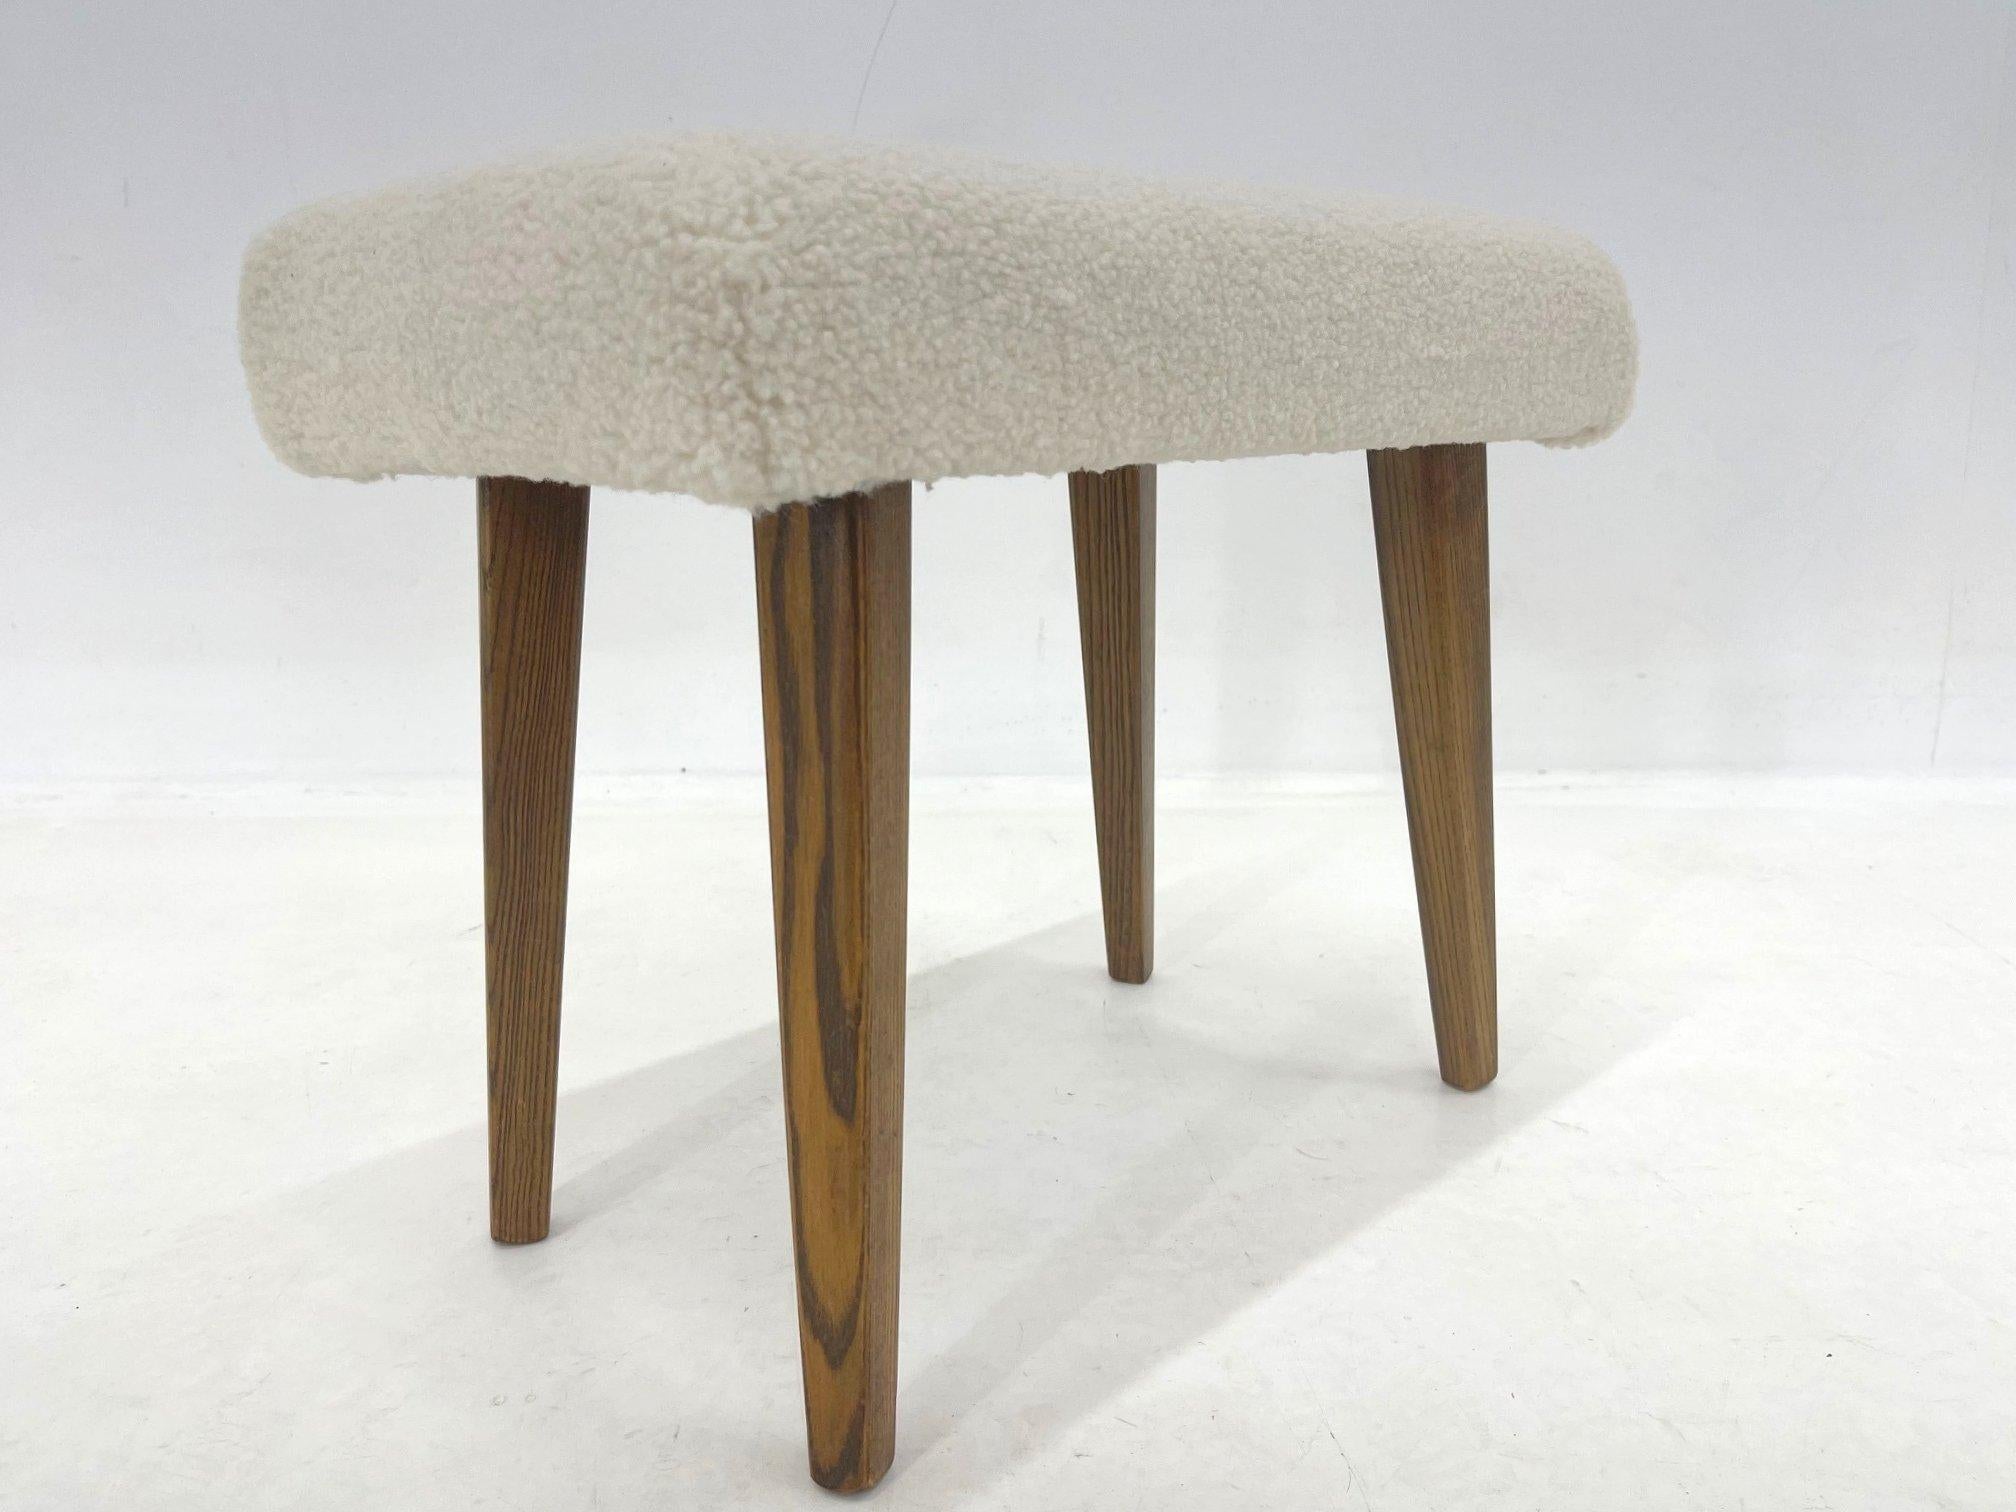 Czech Mid-Century Stool in Sheep Skin Fabric, 1970's For Sale